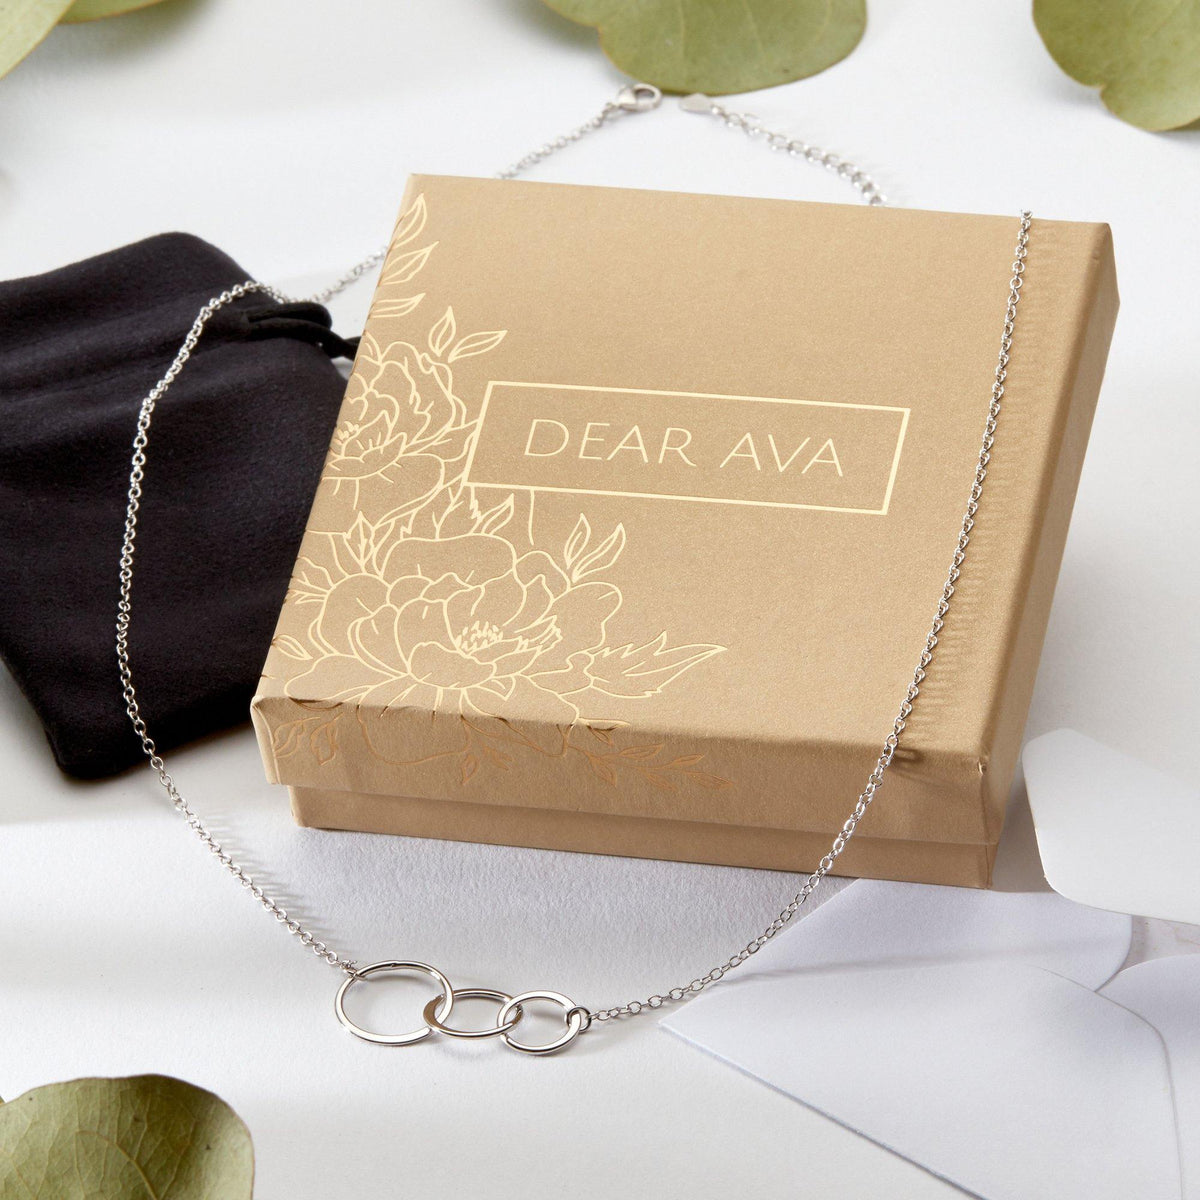 32nd Birthday Necklace - Dear Ava, Jewelry / Necklaces / Pendants